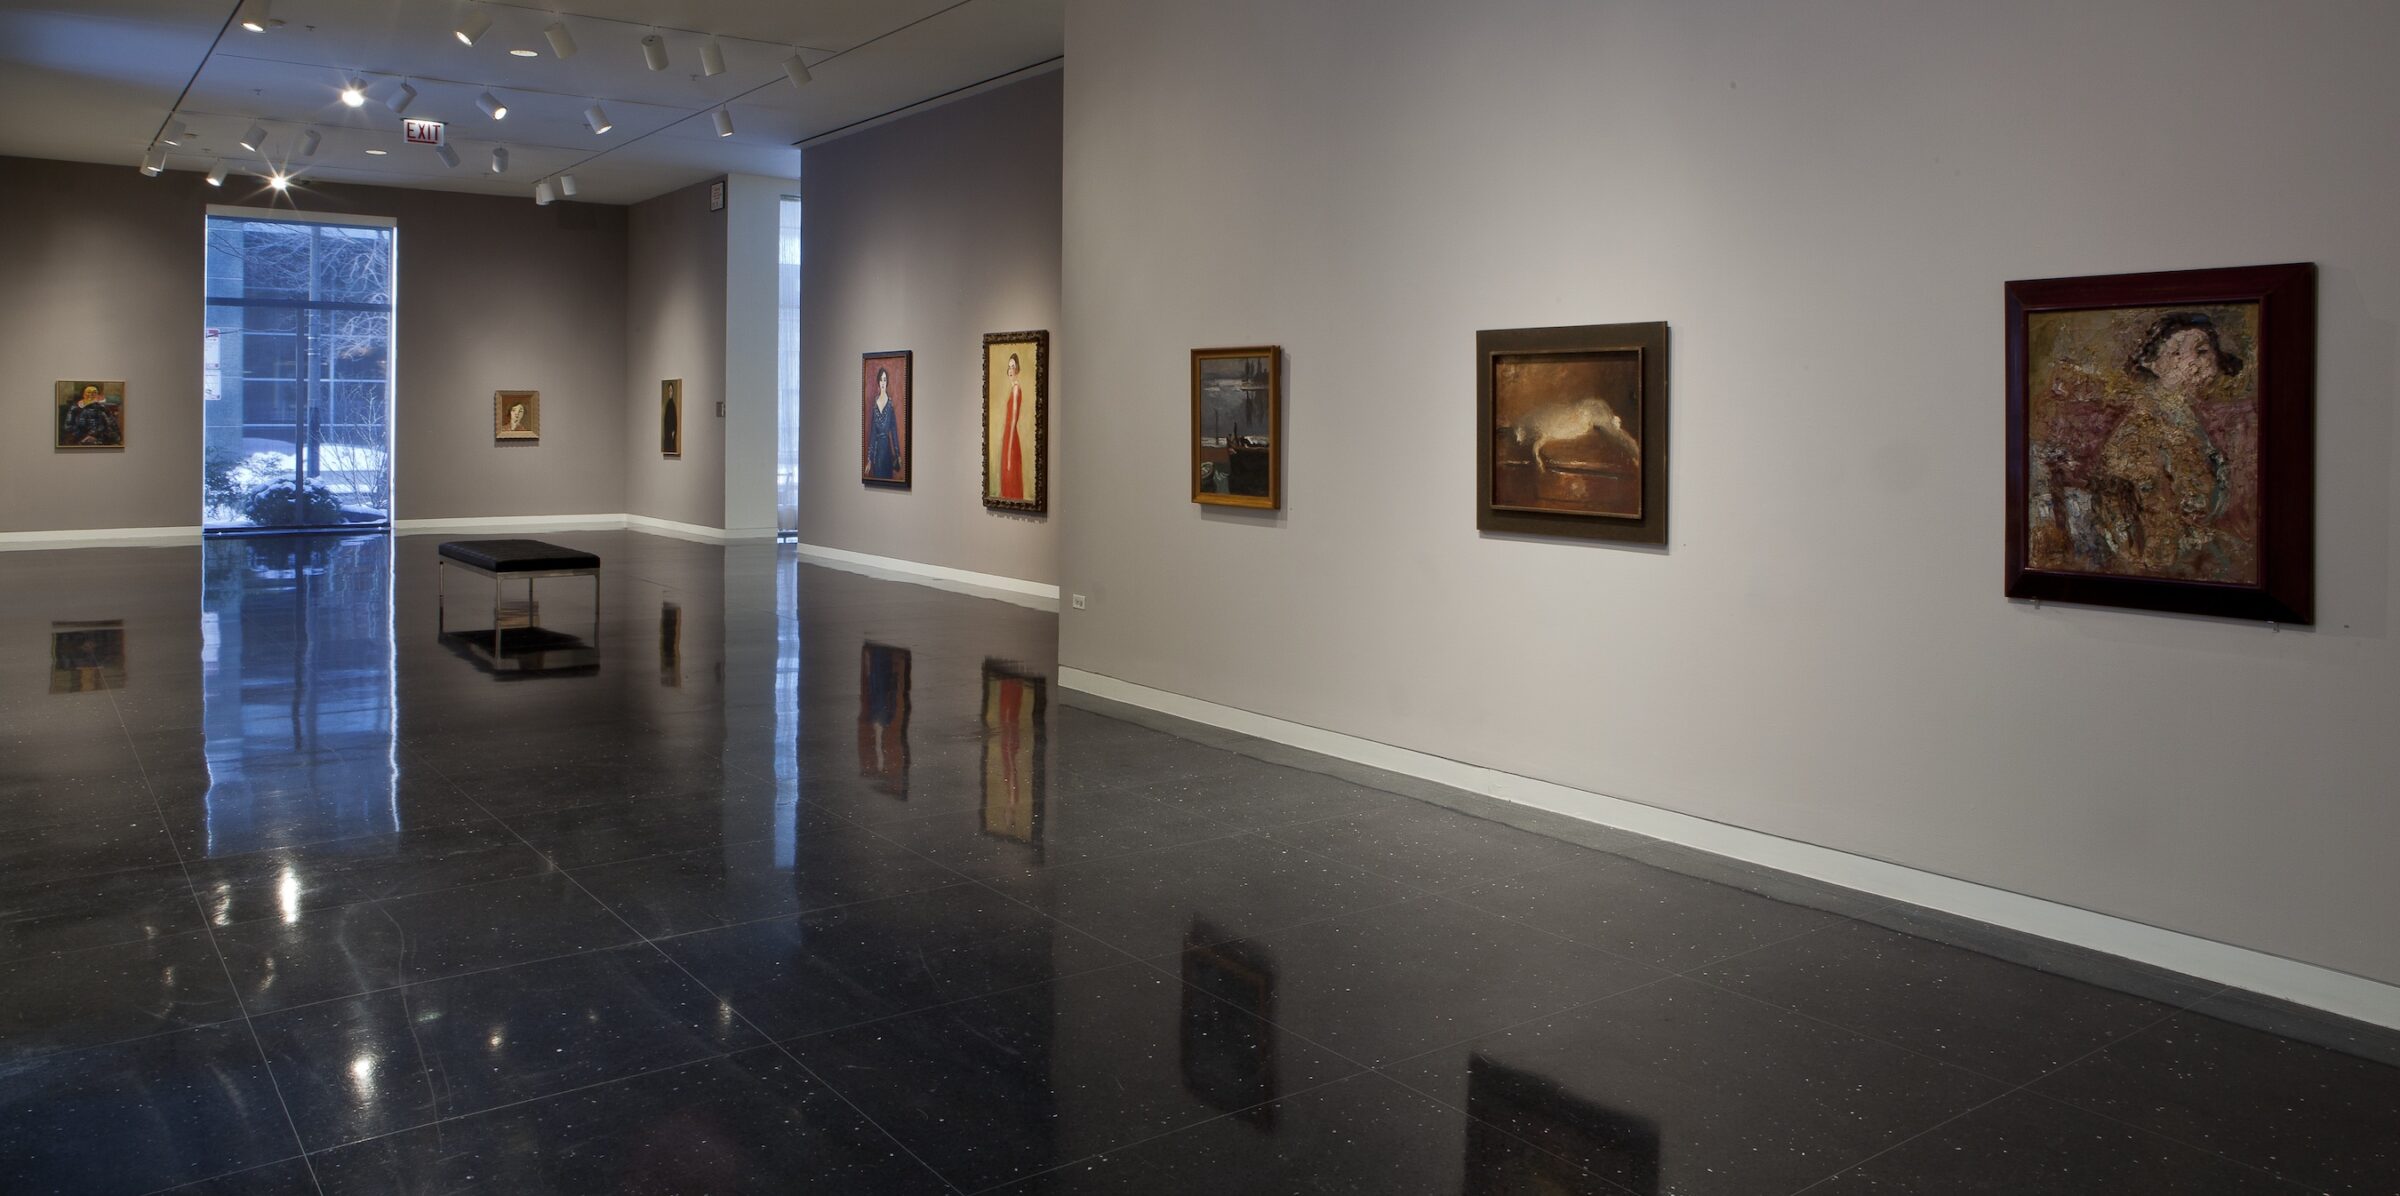 Wide view of a beige gallery in which eight framed paintings of various subjects can be seen hanging on its walls. The majority of the paintings depict female figures. The bust-length portrait furthest to the right and closest to the viewer depicts a figure's bust abstracted by thick strokes of paint.